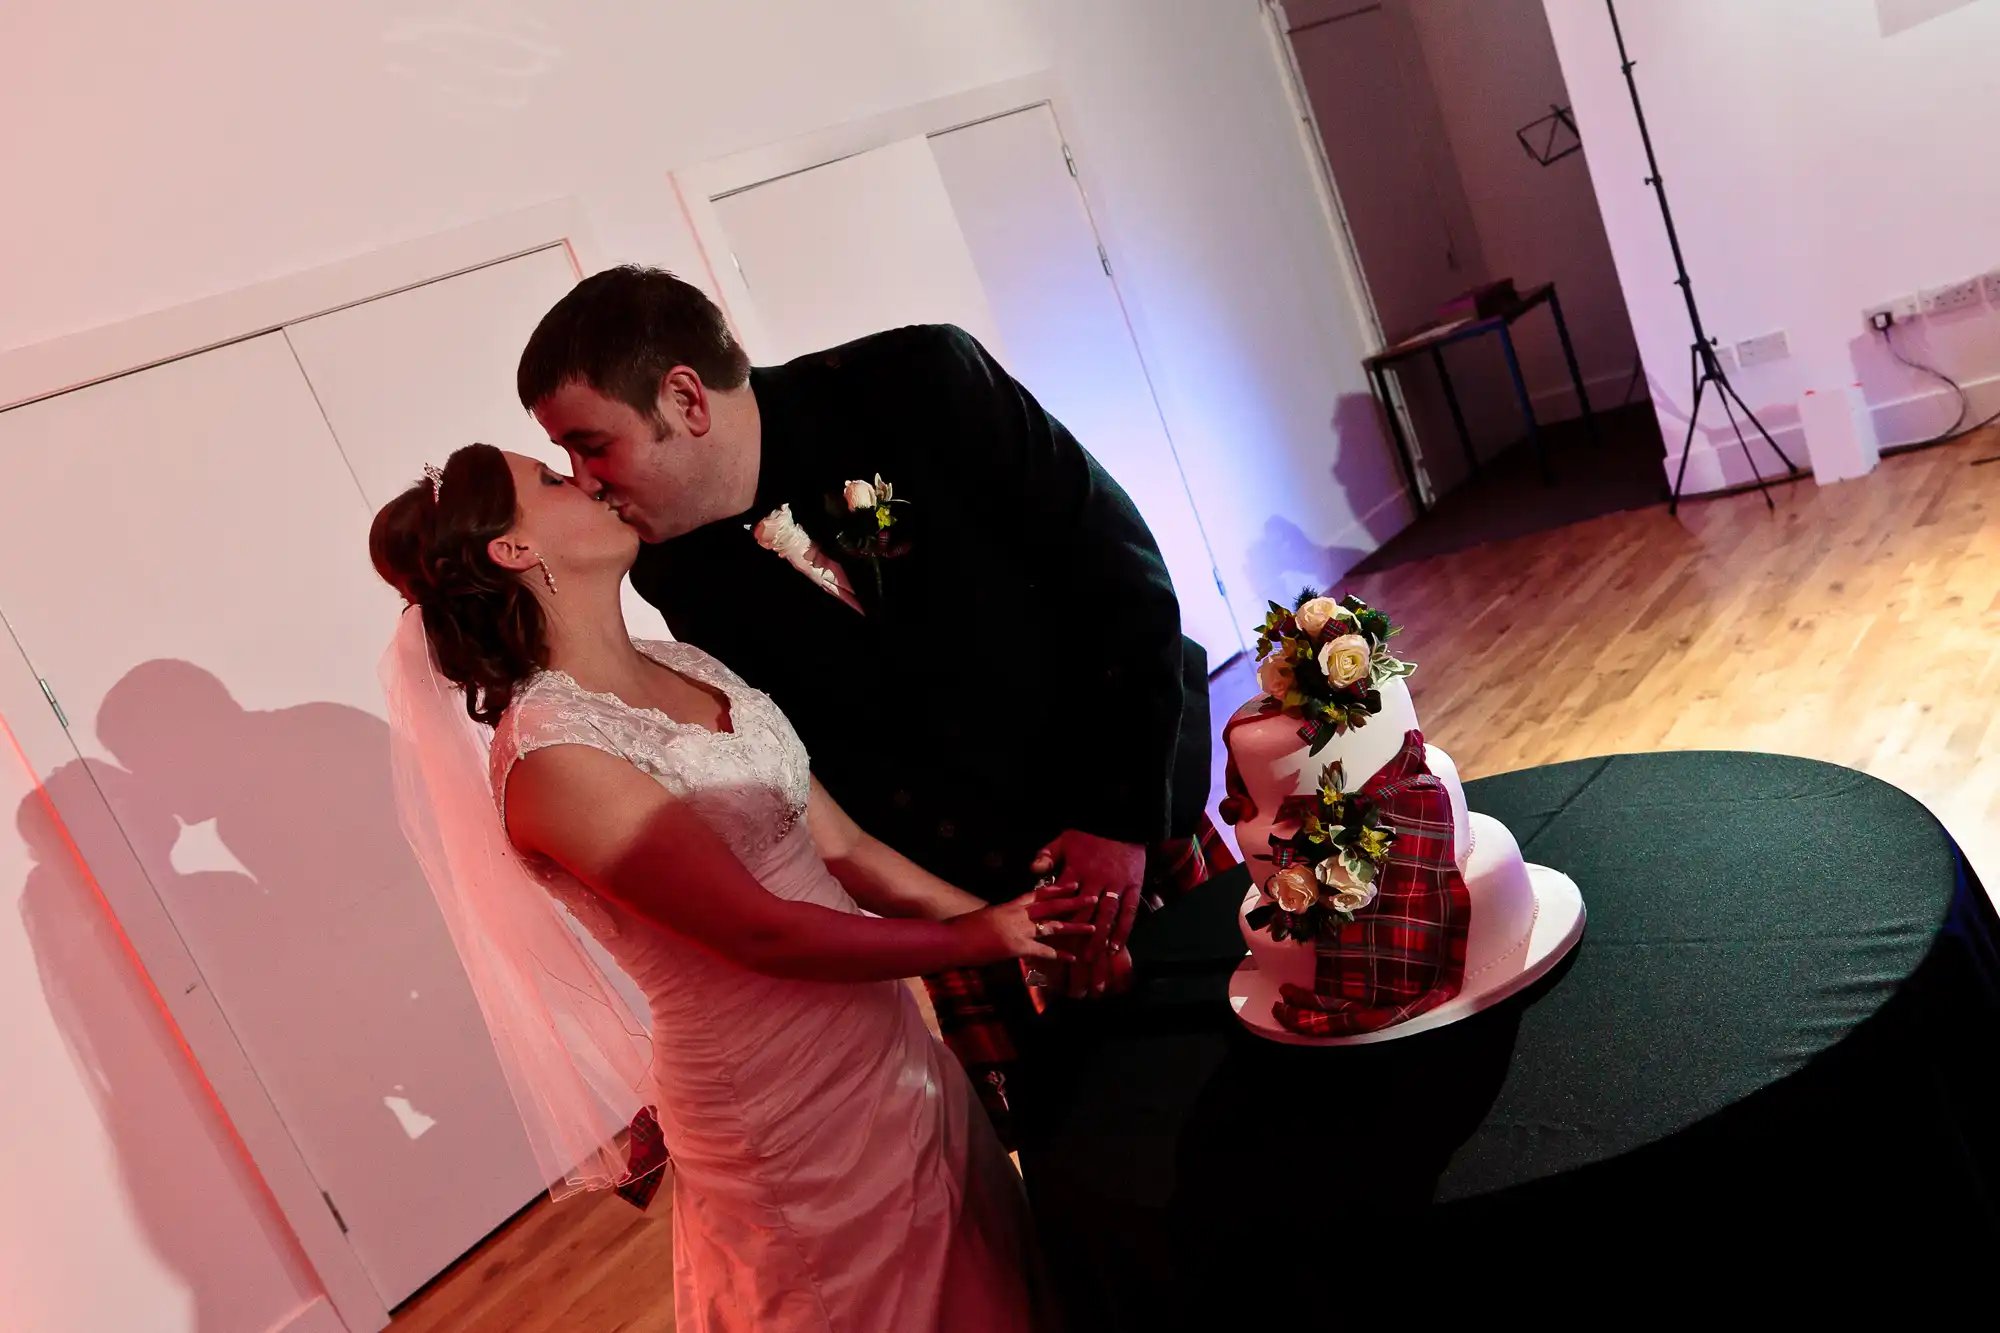 Bride and groom kissing beside their wedding cake in a dimly lit room, with their shadows cast on a white wall.